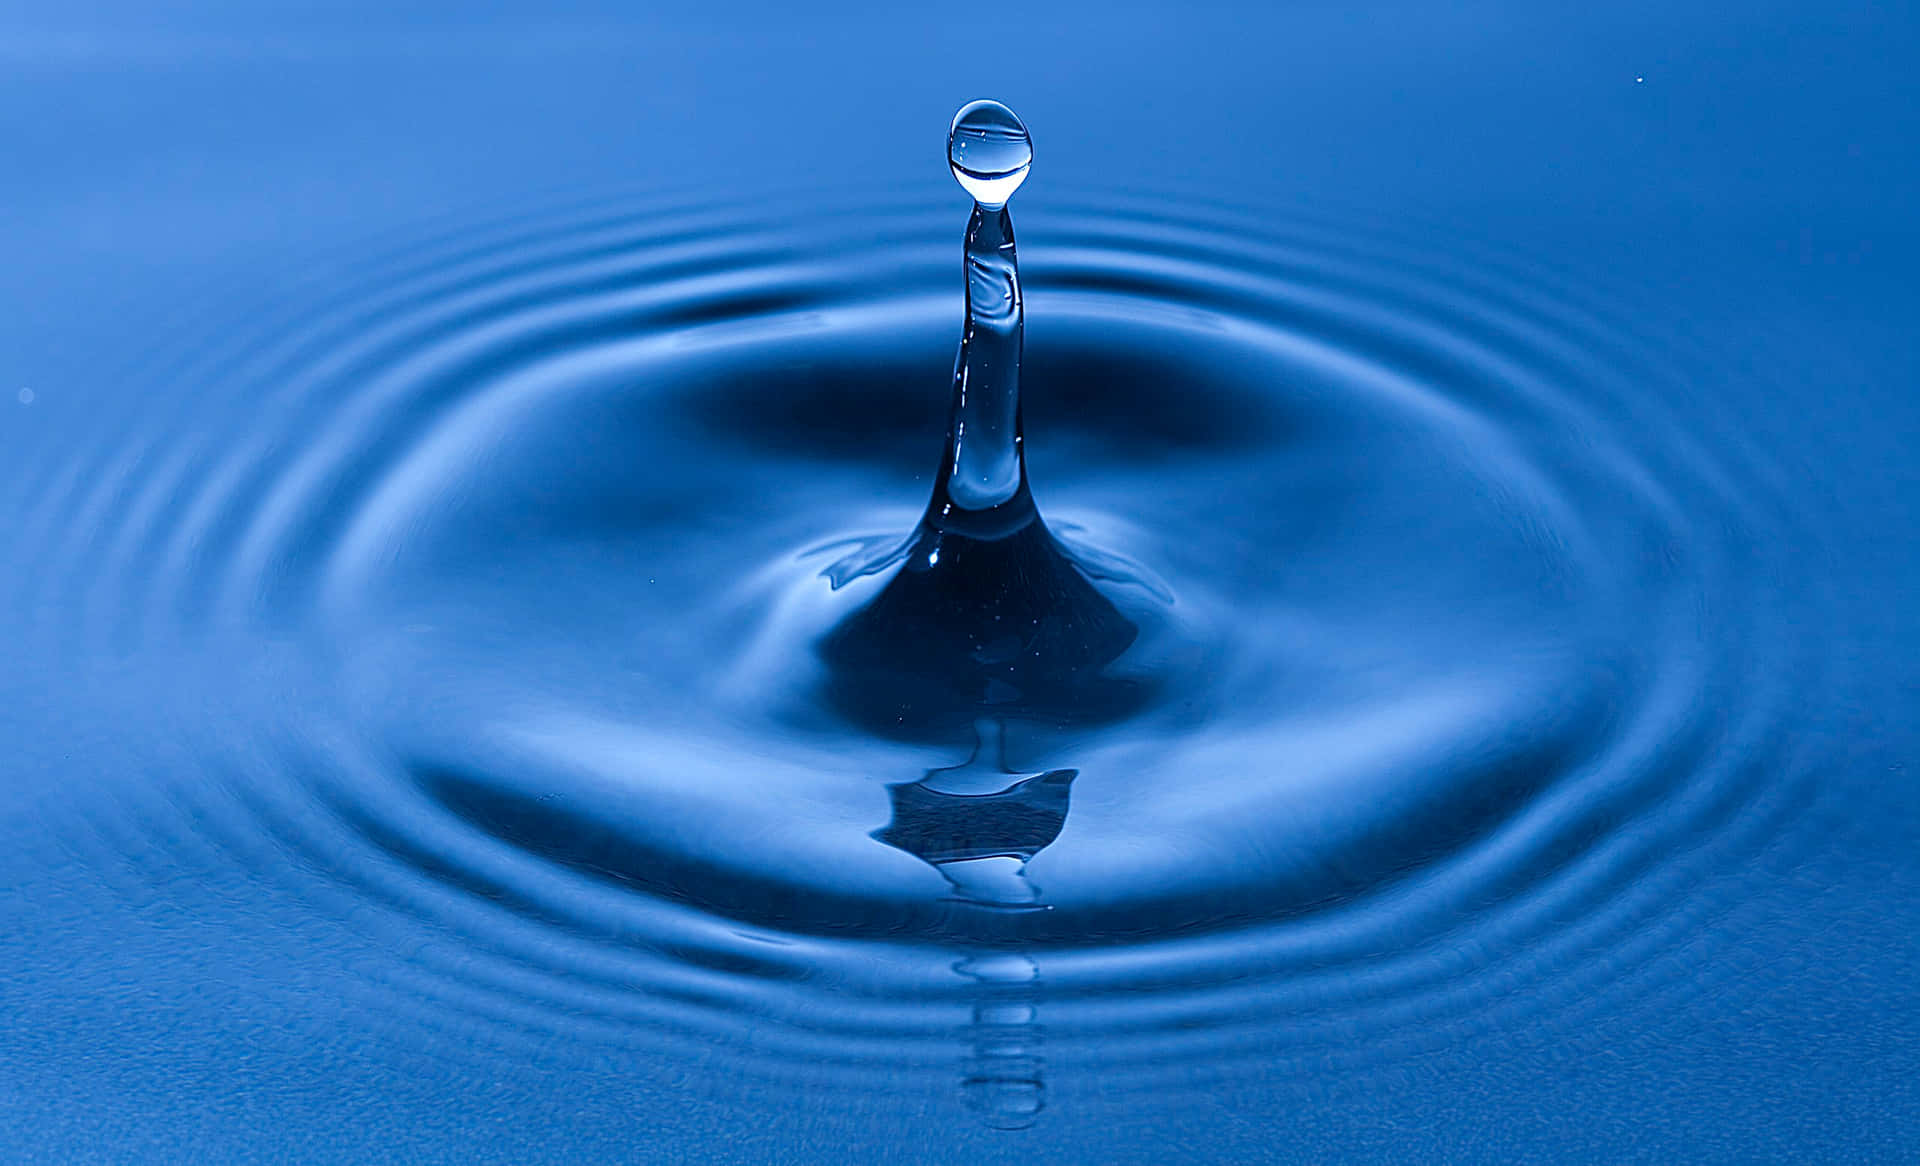 Breaking Through the Surface - A Water Droplet's Journey